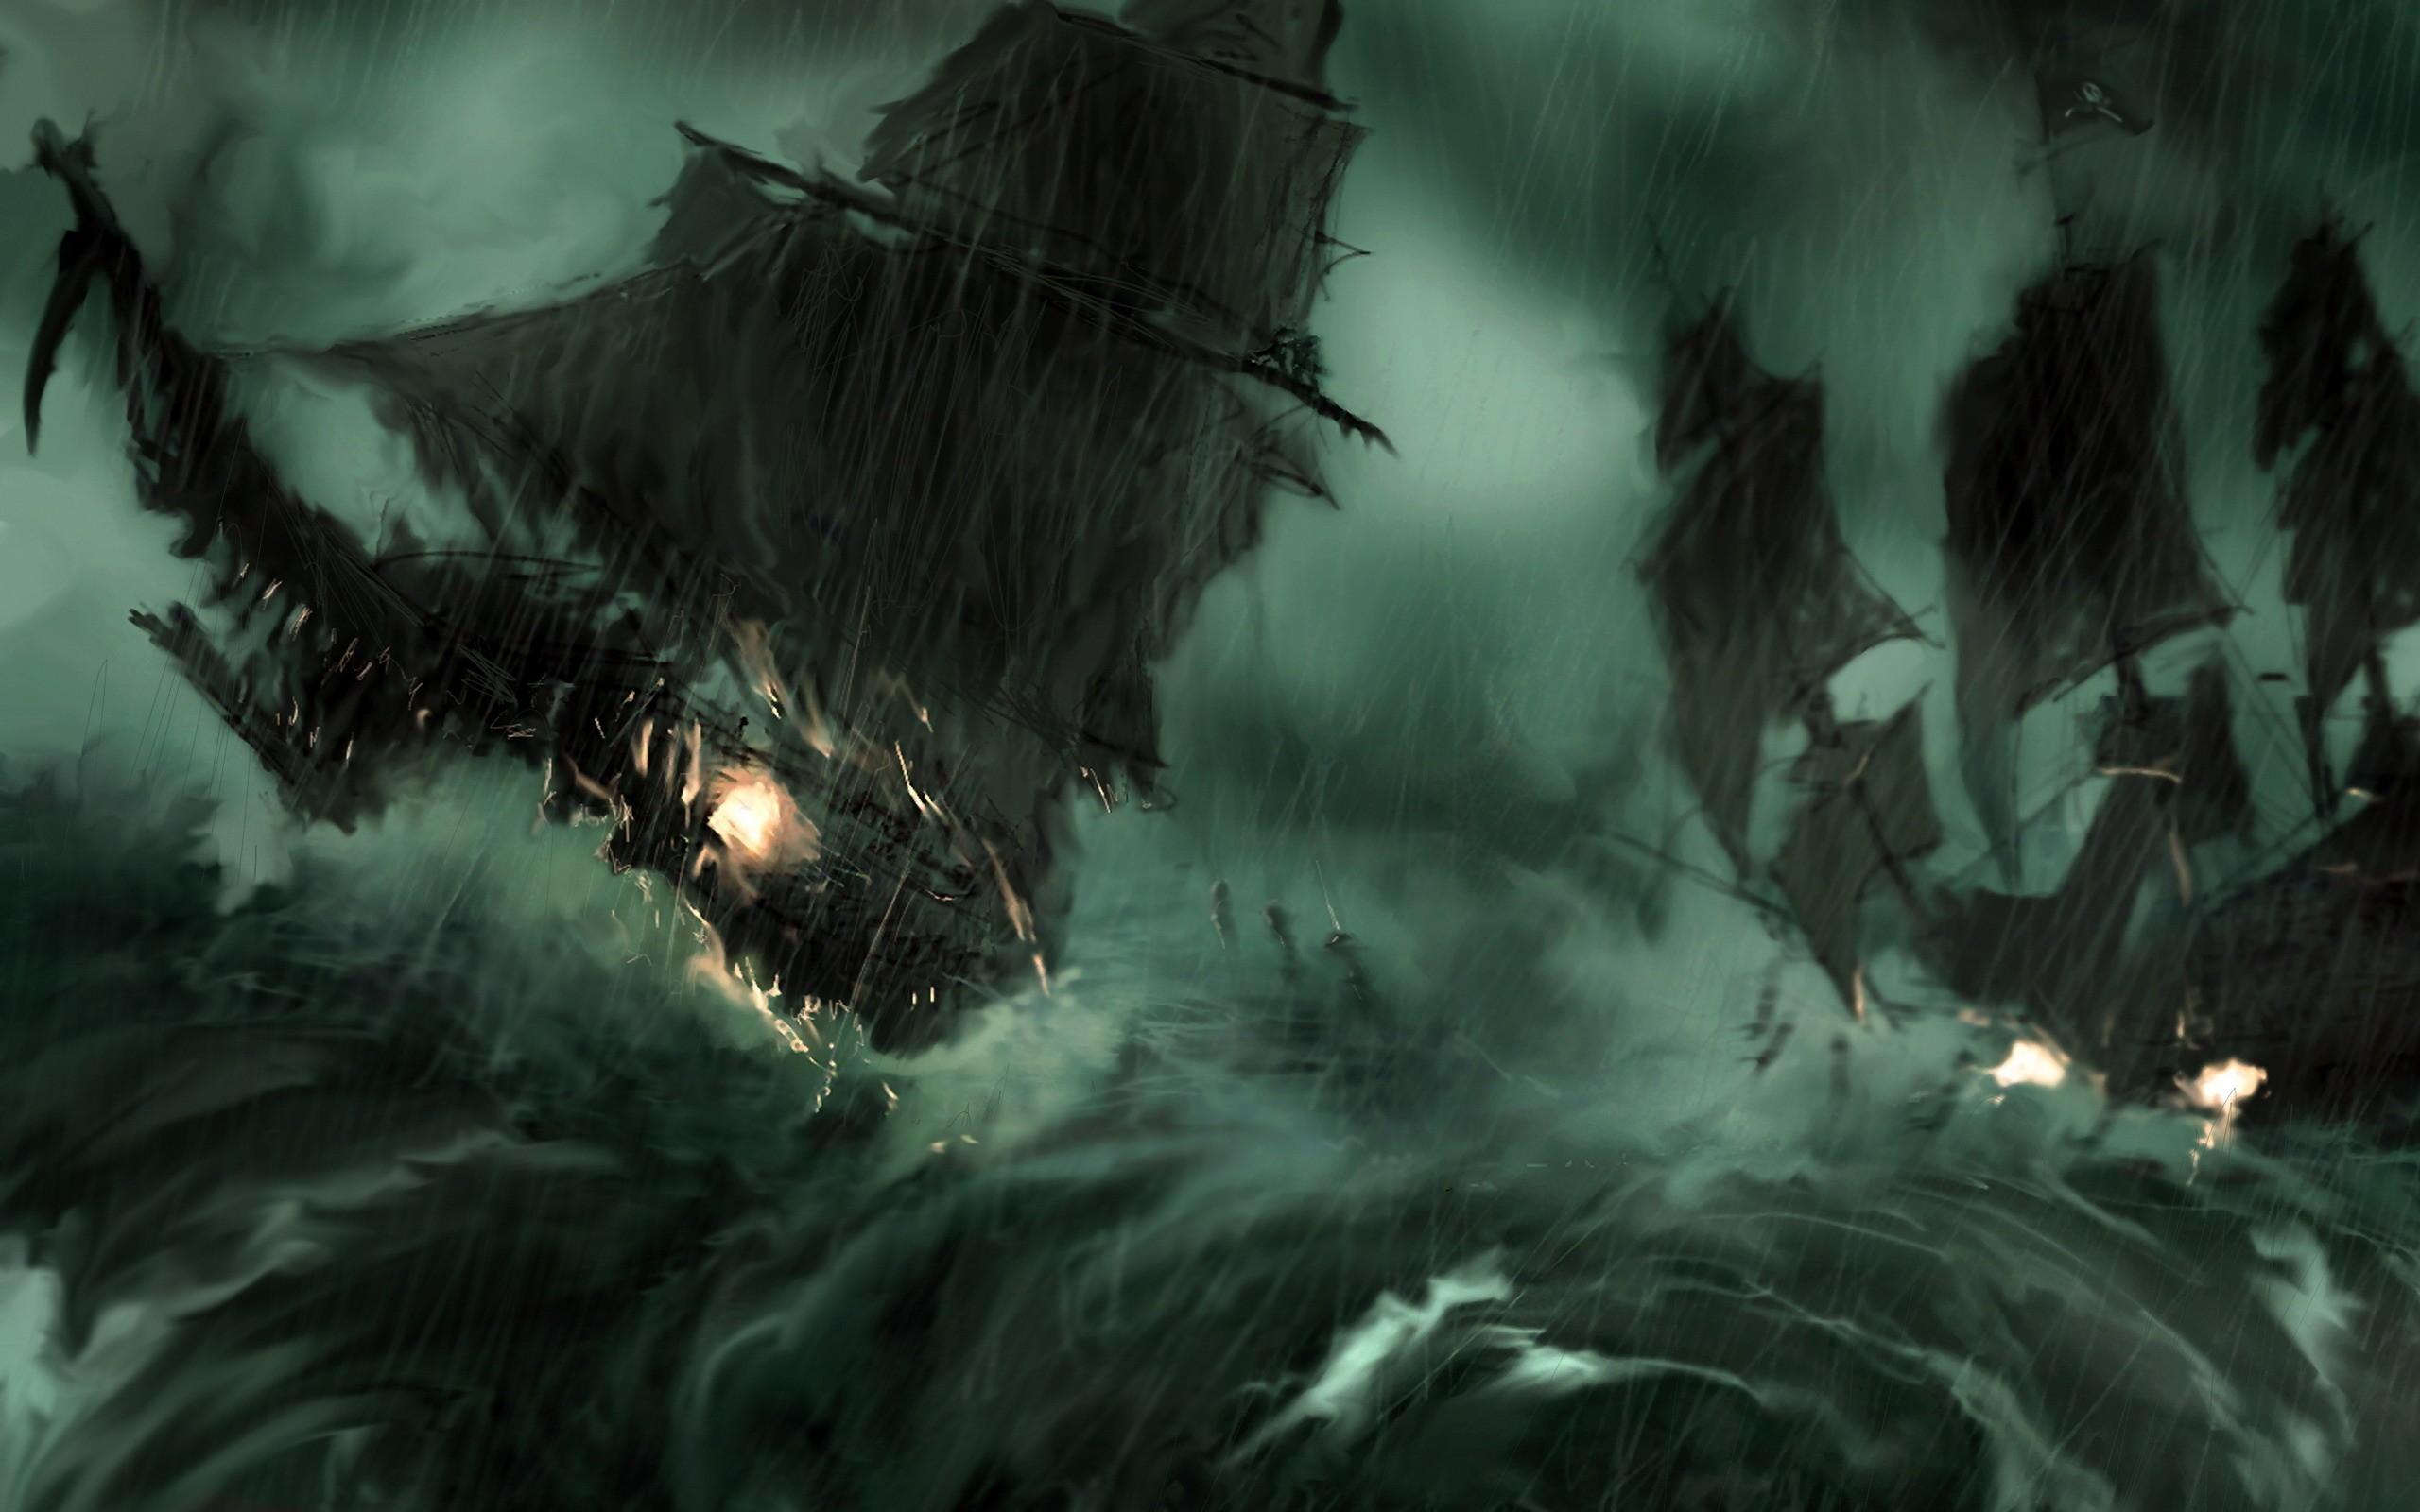 Ghost Ship Wallpaper 2560x1600 For Android 40 WTG305210.com